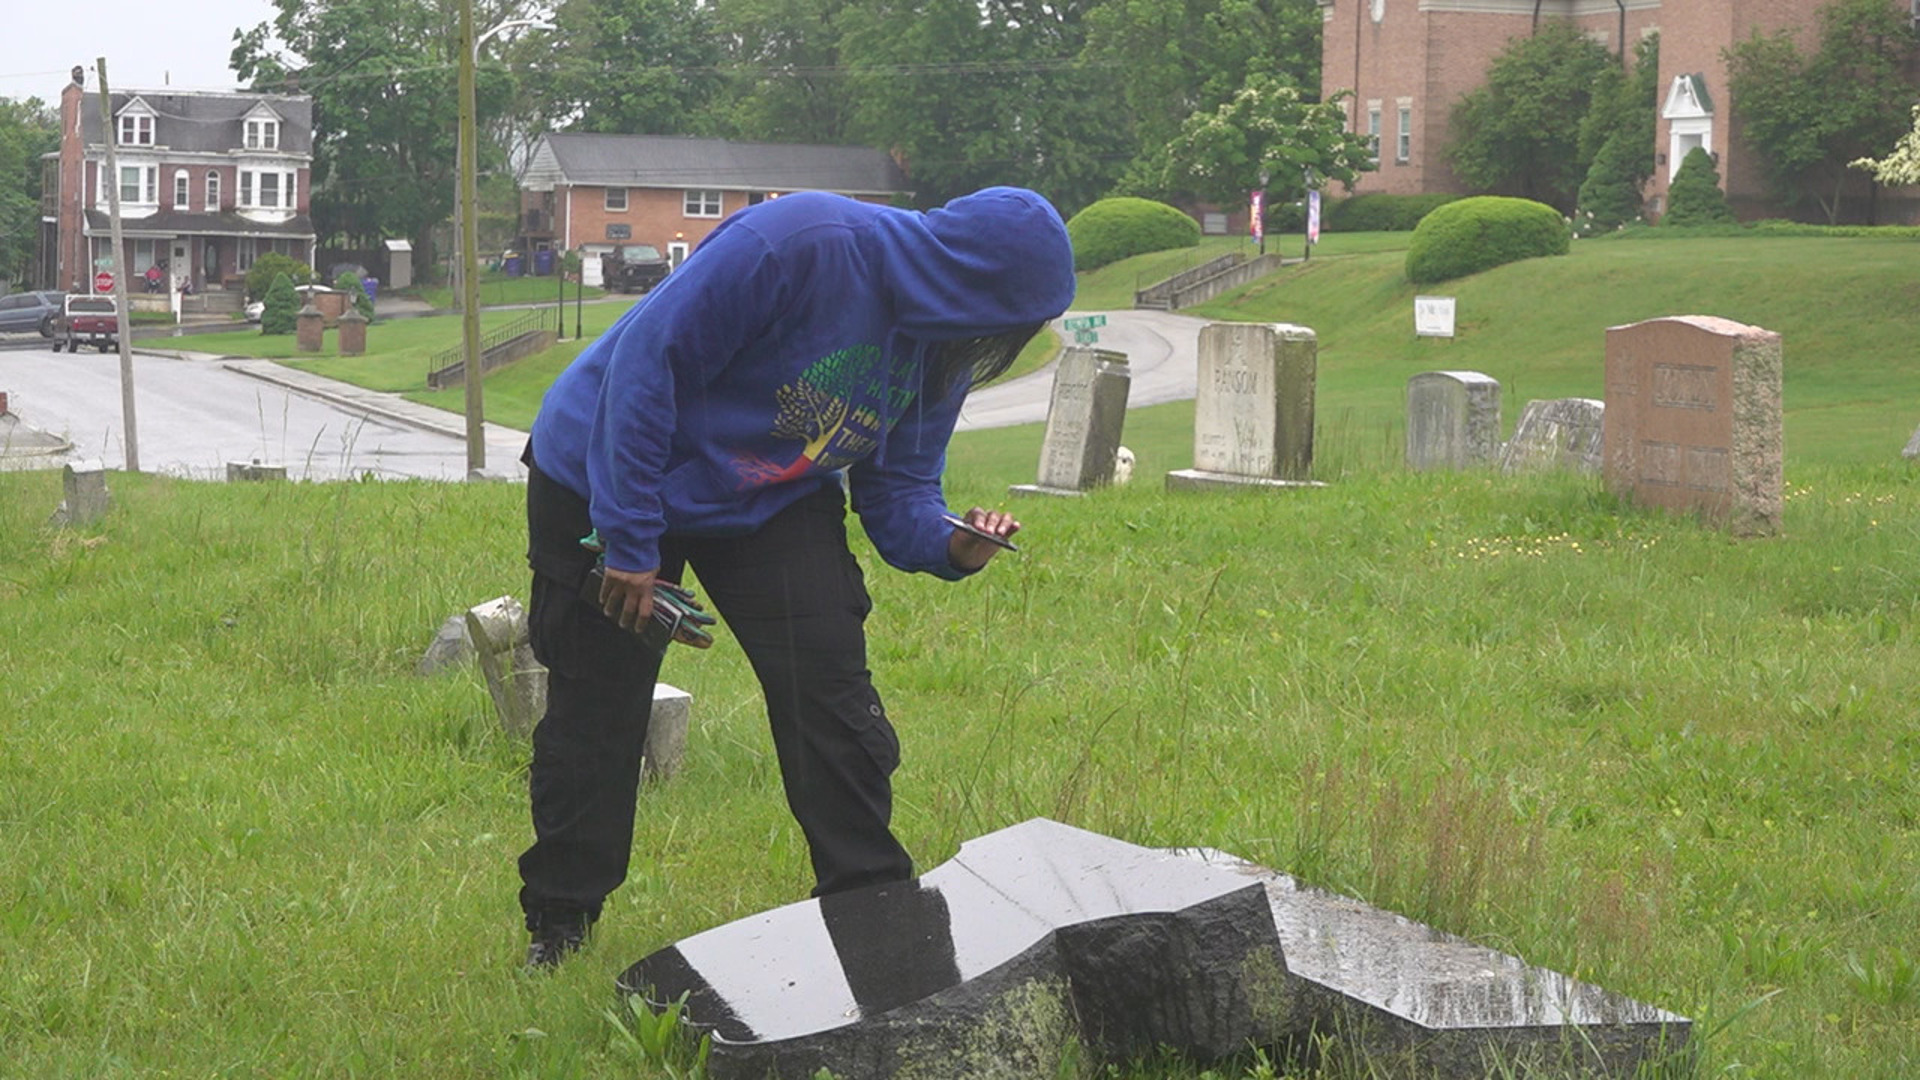 The Friends of Lebanon Cemetery say they filed a police report after discovering several gravestones knocked over on Friday.